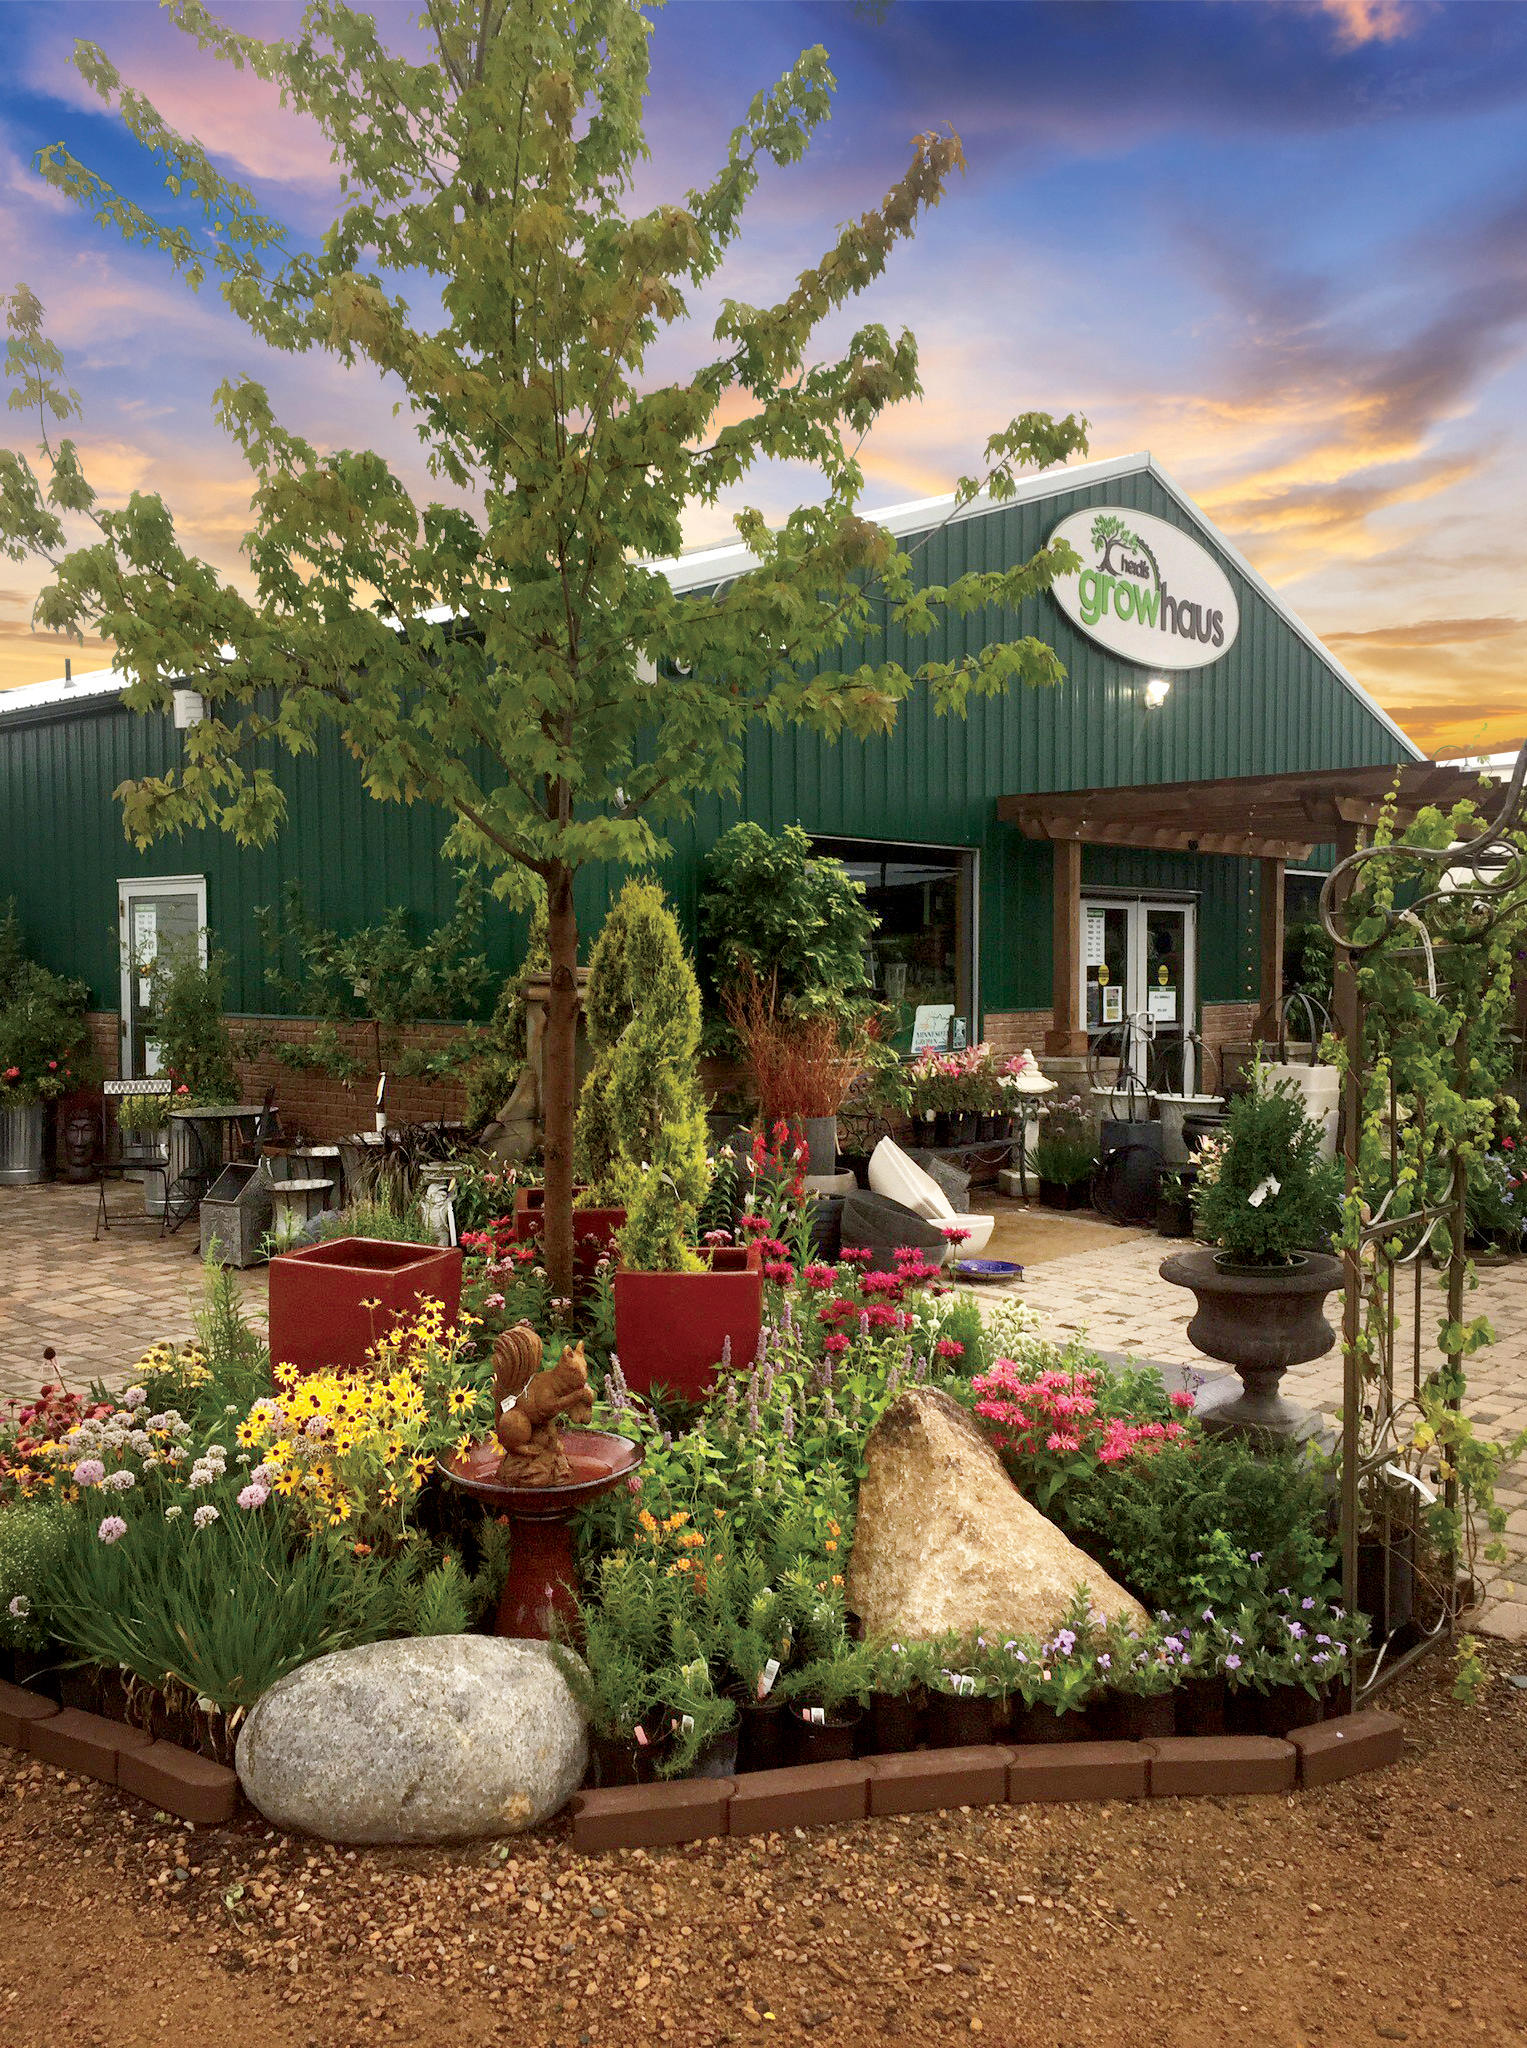 At Heidi's GrowHaus and Lifestyle Gardens, our full service sustainable landscape design, build, installation and maintenance firm proudly serves communities in and around the greater Twin Cities metro area.